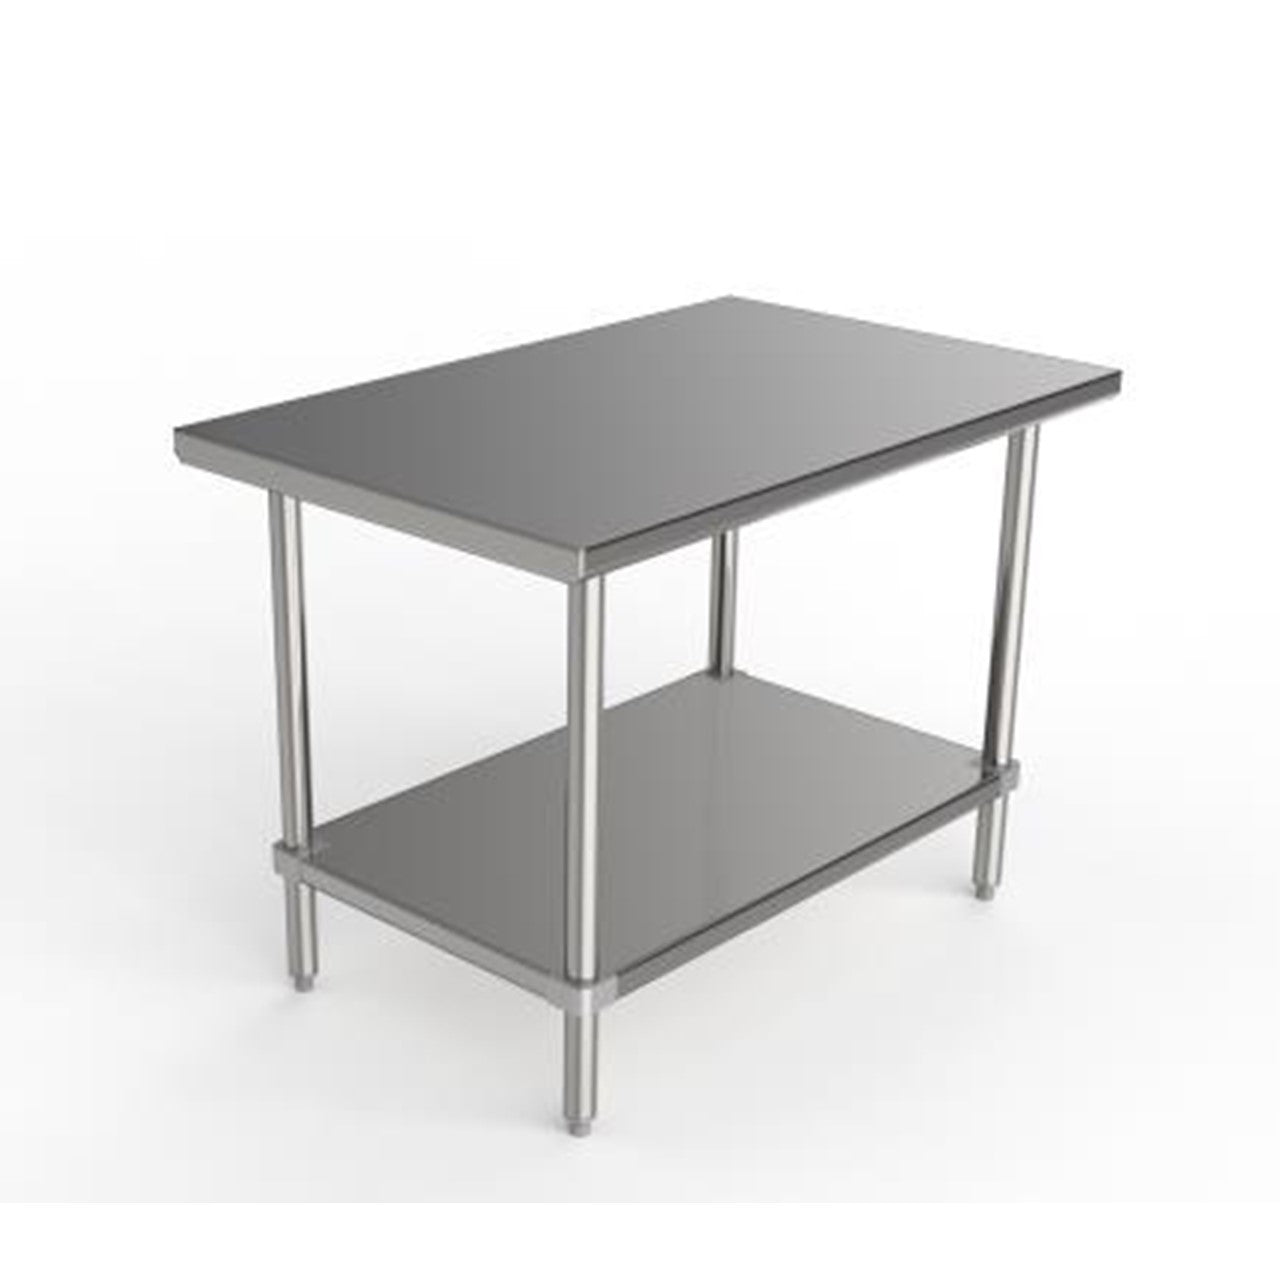 GSW Commercial Grade Flat Top Work Table with Stainless Steel Top, Galvanized Undershelf & Legs, Adjustable Bullet Feet, NSF/ETL Approved to Meet Sanitation Food Service Standard 37 (30"W x 36"L x 35"H)